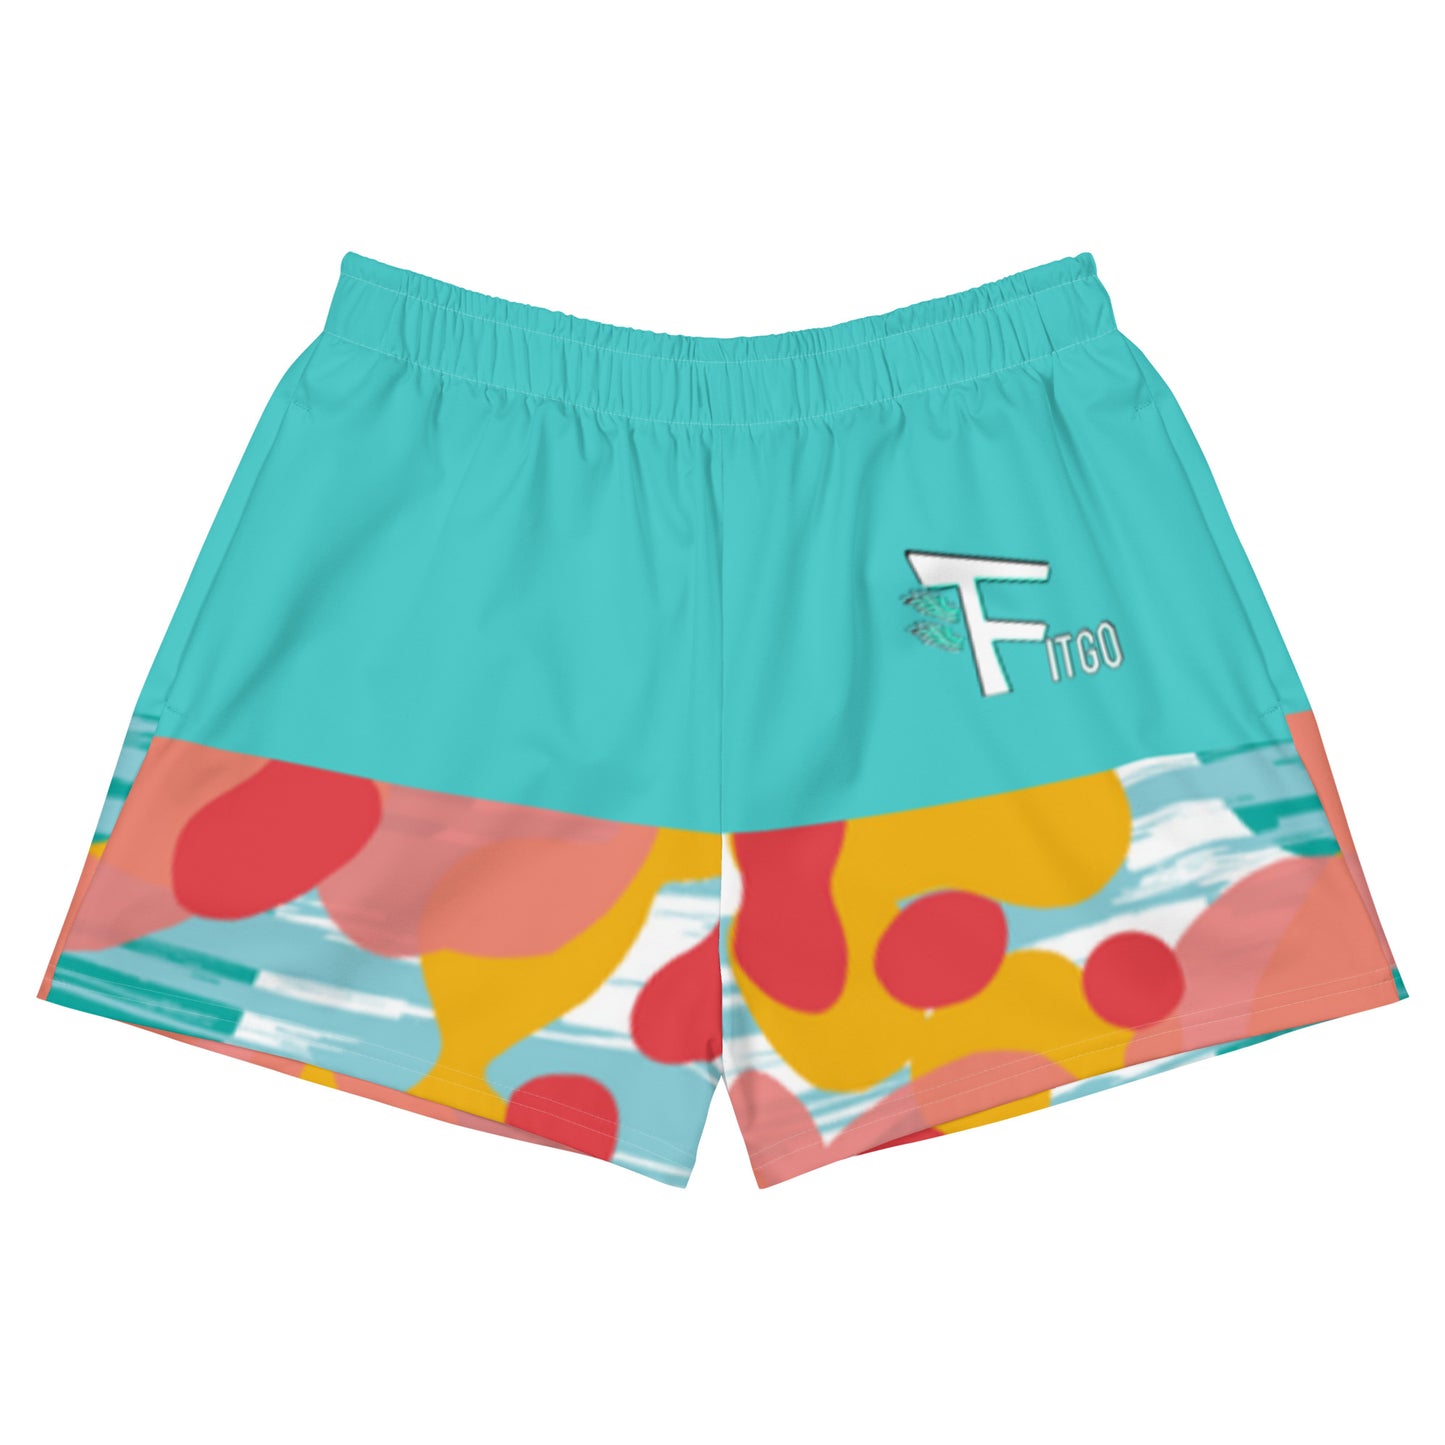 Women's Fitgo Colorful Life Athletic Shorts